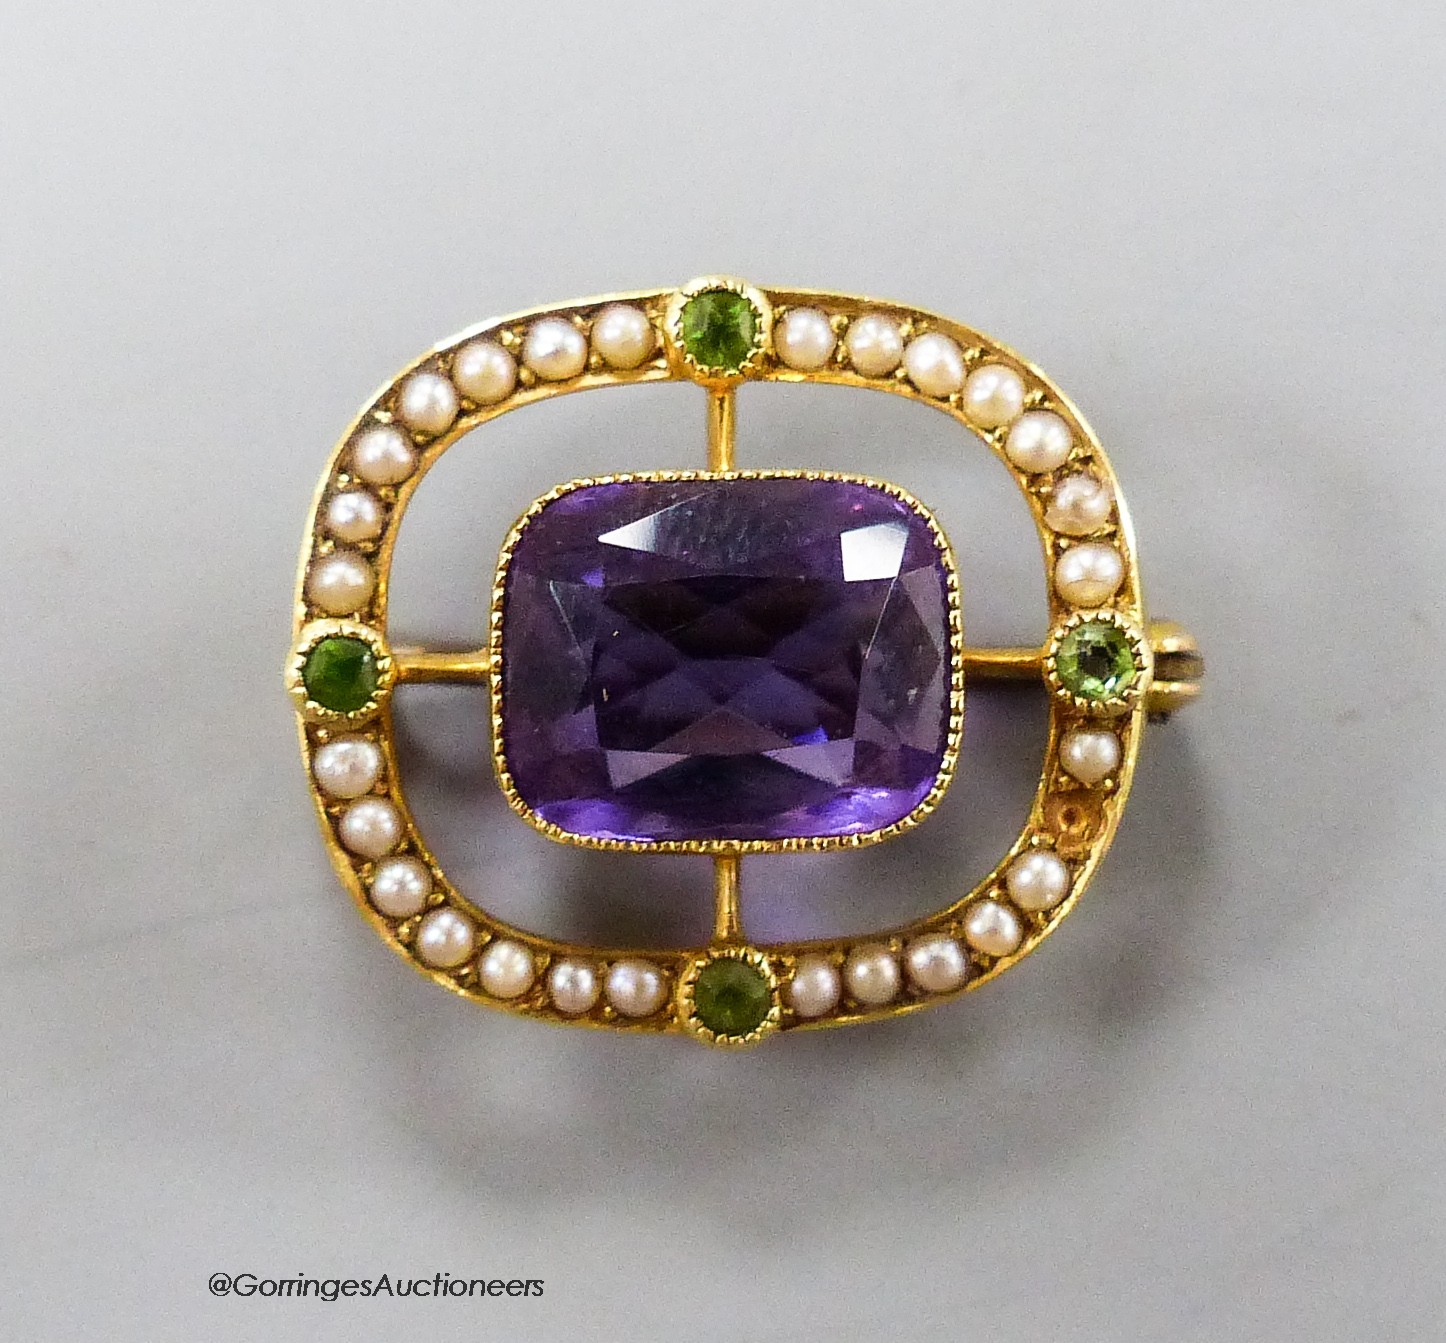 An early 20th century 15ct, amethyst, garnet and seed pearl pendant brooch, in the suffragette colours, 21mm, gross 3.6 grams.